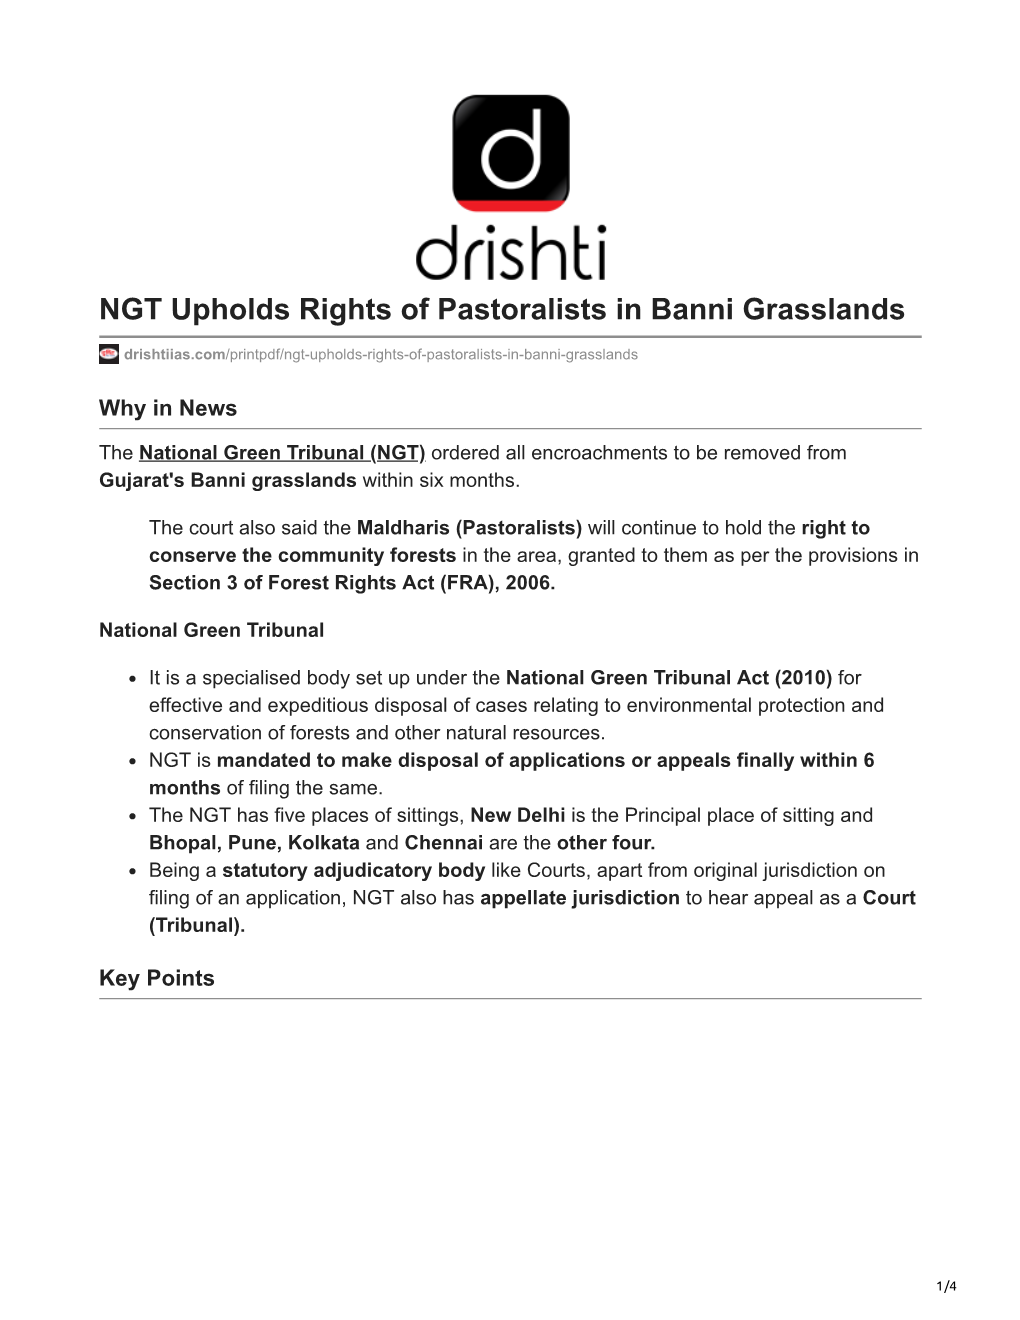 NGT Upholds Rights of Pastoralists in Banni Grasslands